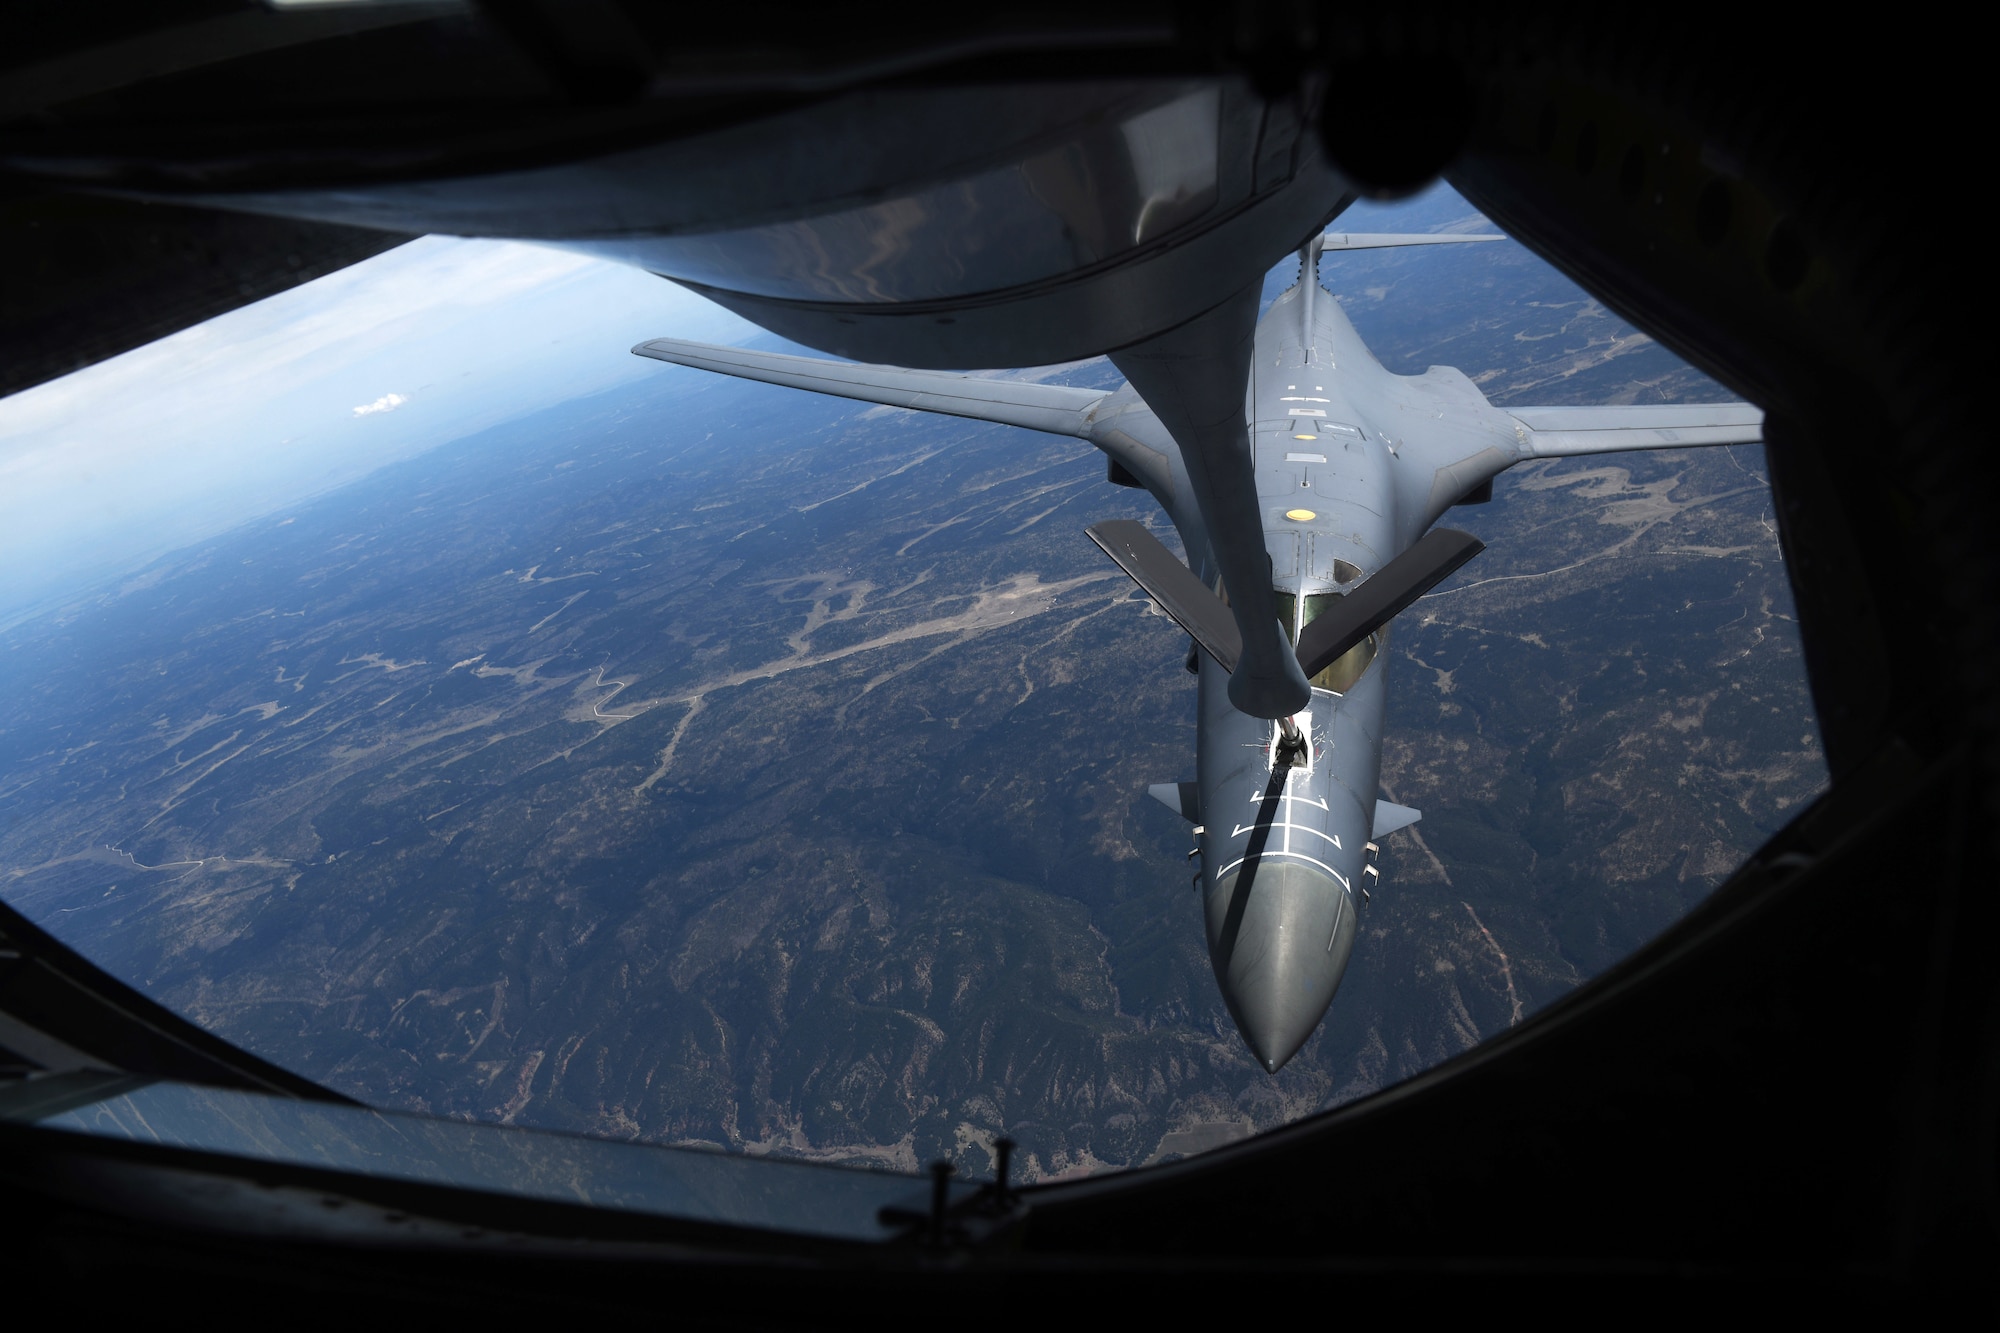 A B-1B Lancer is refueled during Combat Raider 19-2 by a KC-135 Stratotanker above Wyoming on May 15, 2019. Combat Raider is a large-force exercise hosted by the 28th Bomb Wing at Ellsworth Air Force Base, S.D., where service members receive valuable training that can be used in a deployed environment. (U.S. Air Force photo by Senior Airman Thomas Karol)